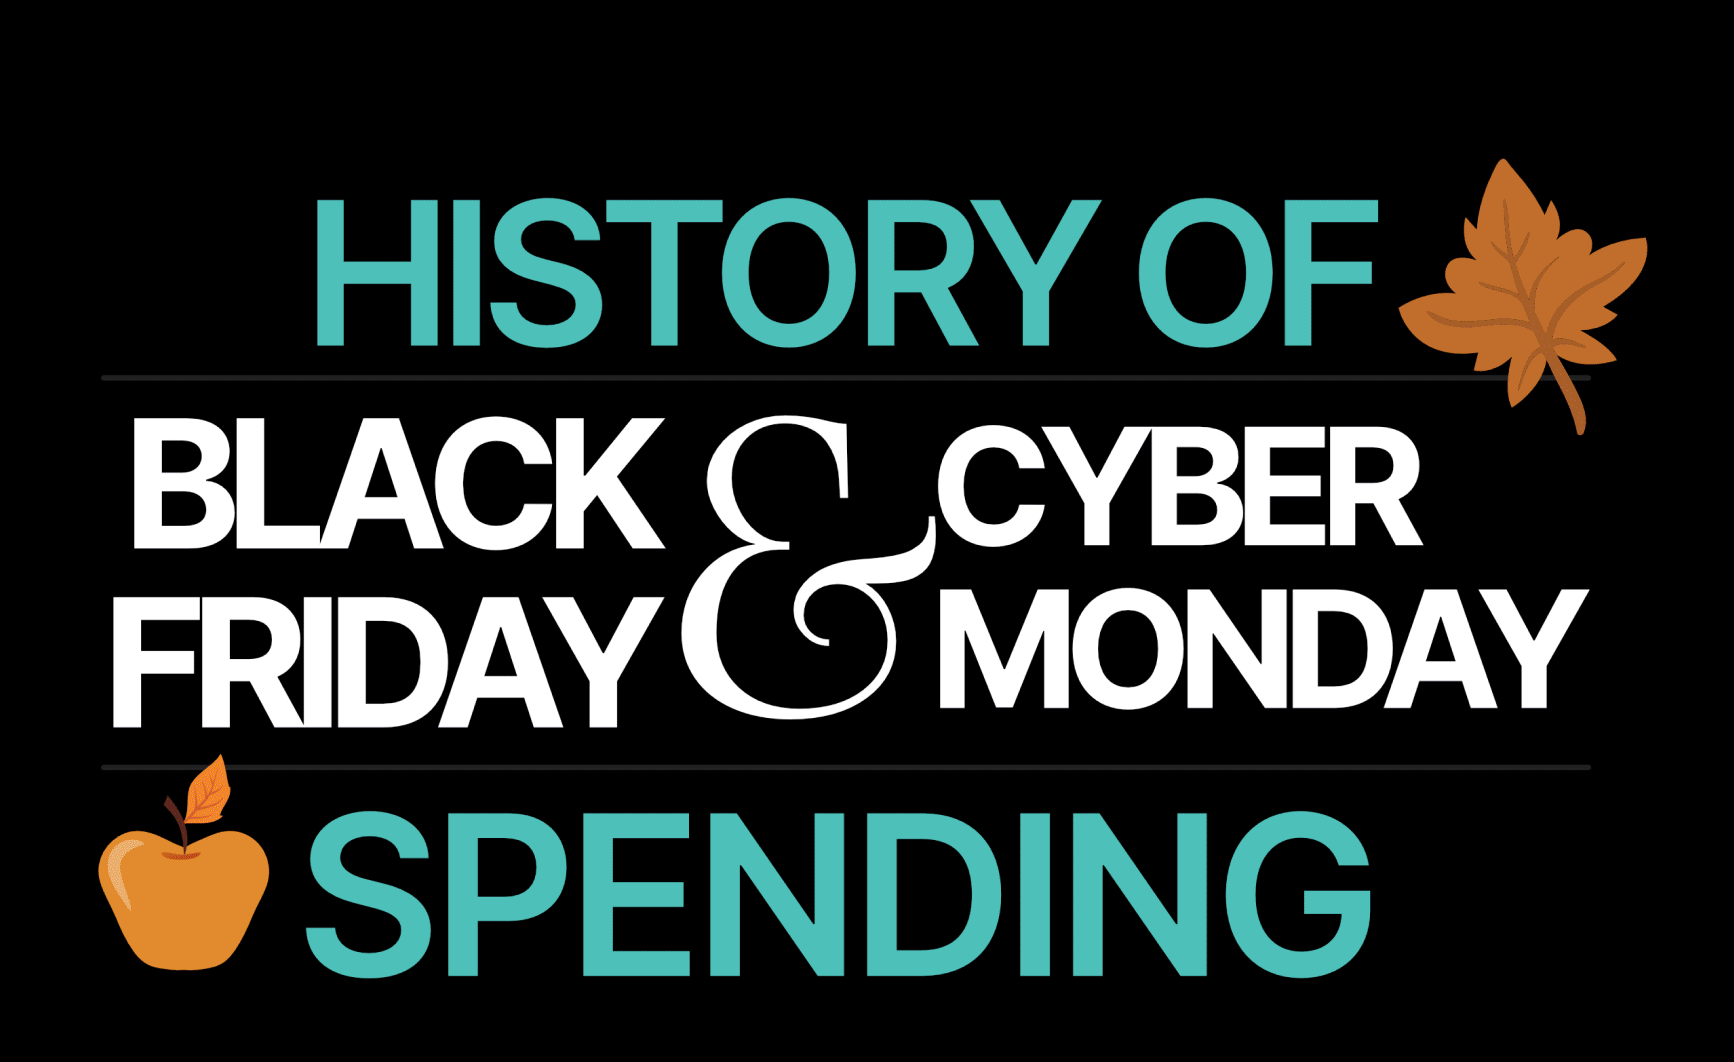 History of Black Friday and Cyber Monday Spending